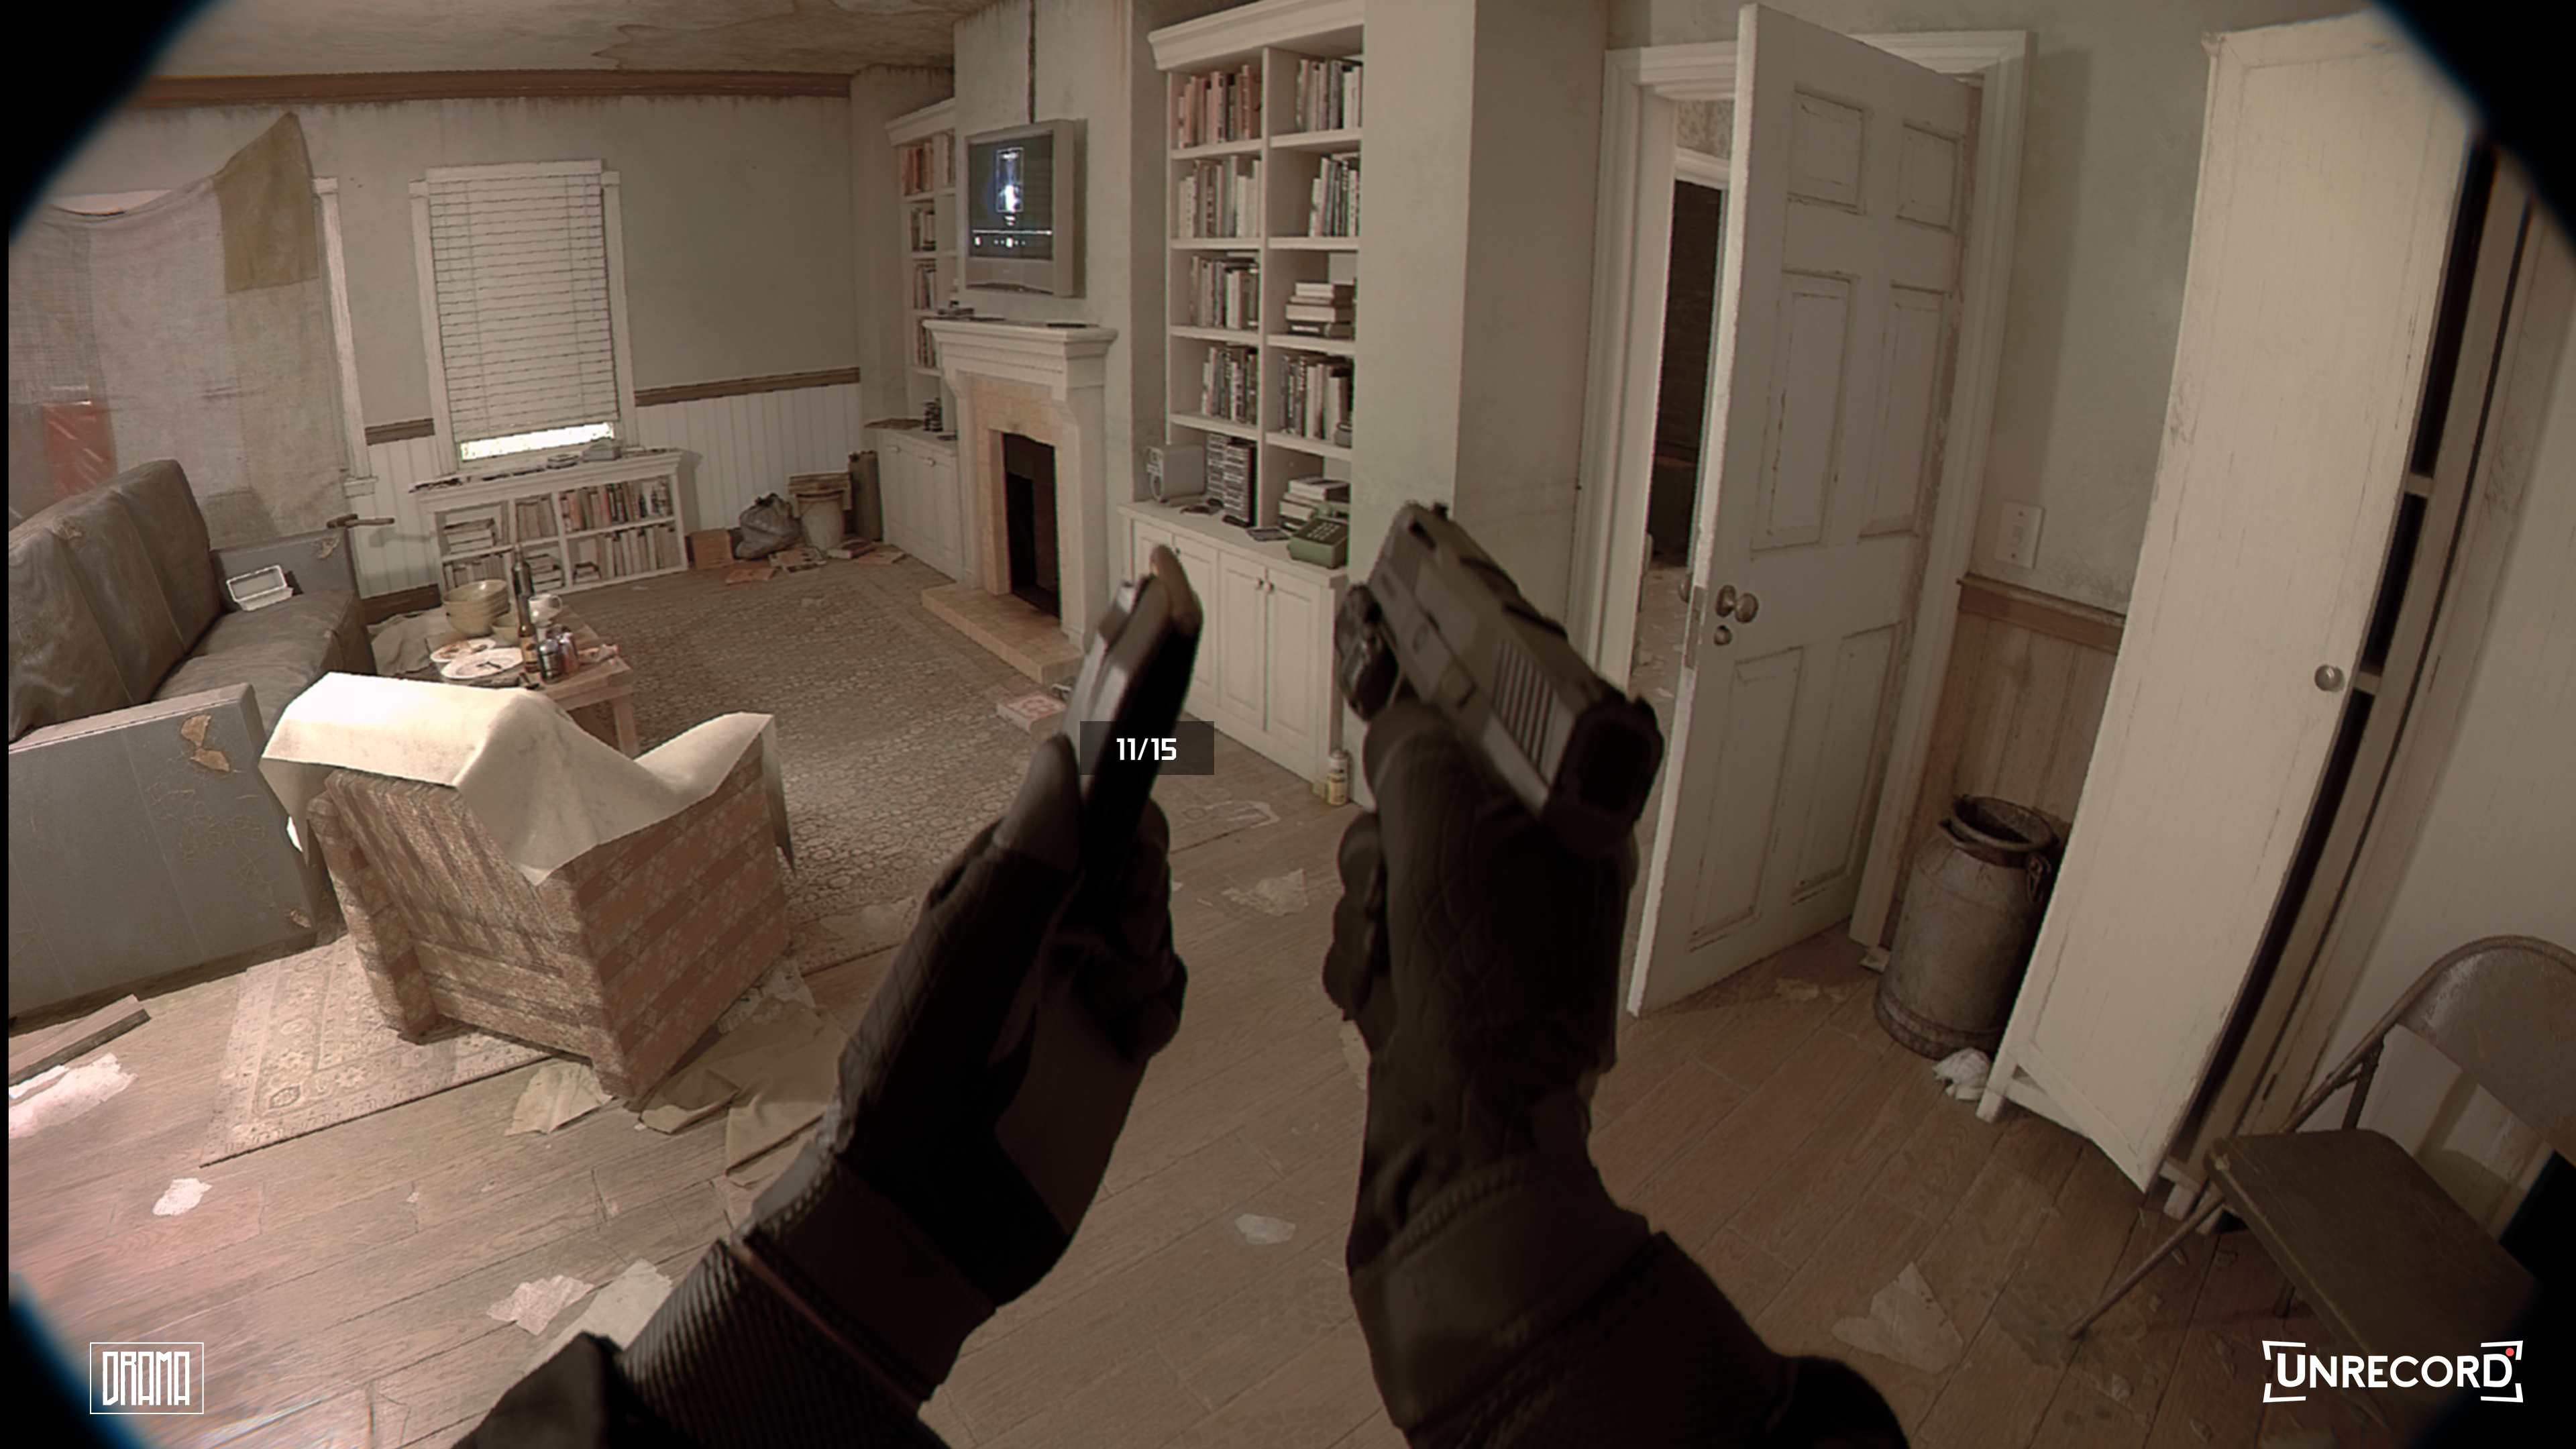 The freakily photorealistic 'bodycam FPS' we glimpsed final 12 months now has a trailer and Steam web page